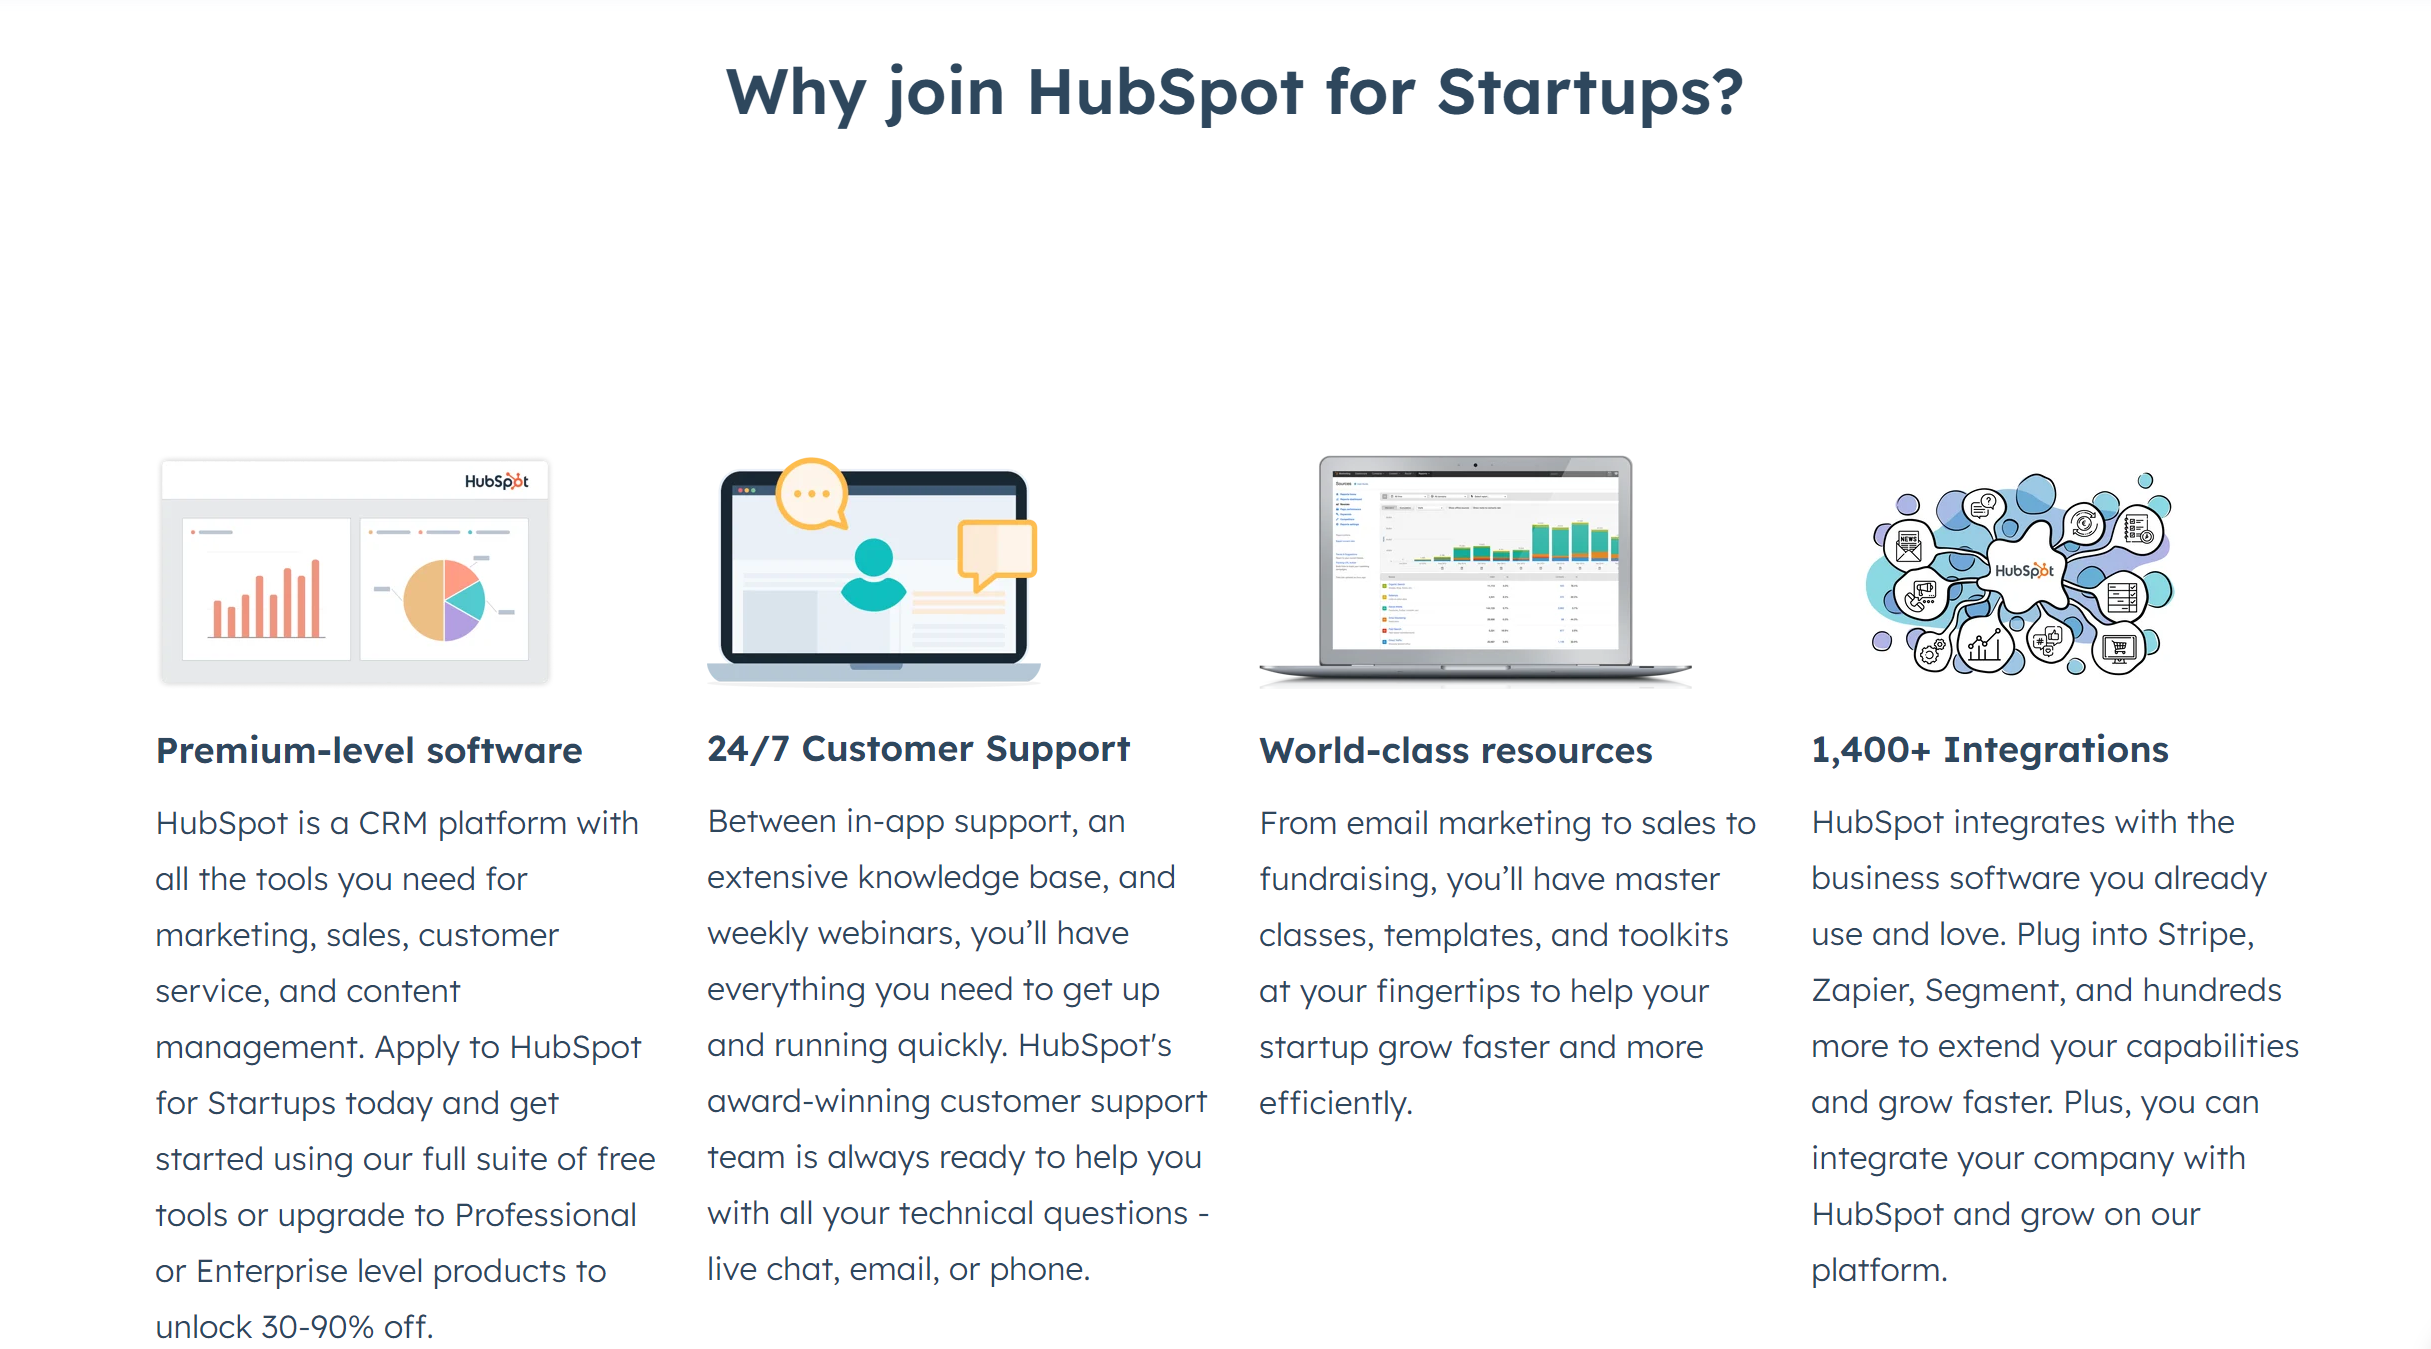 Why HubSpot For Startups